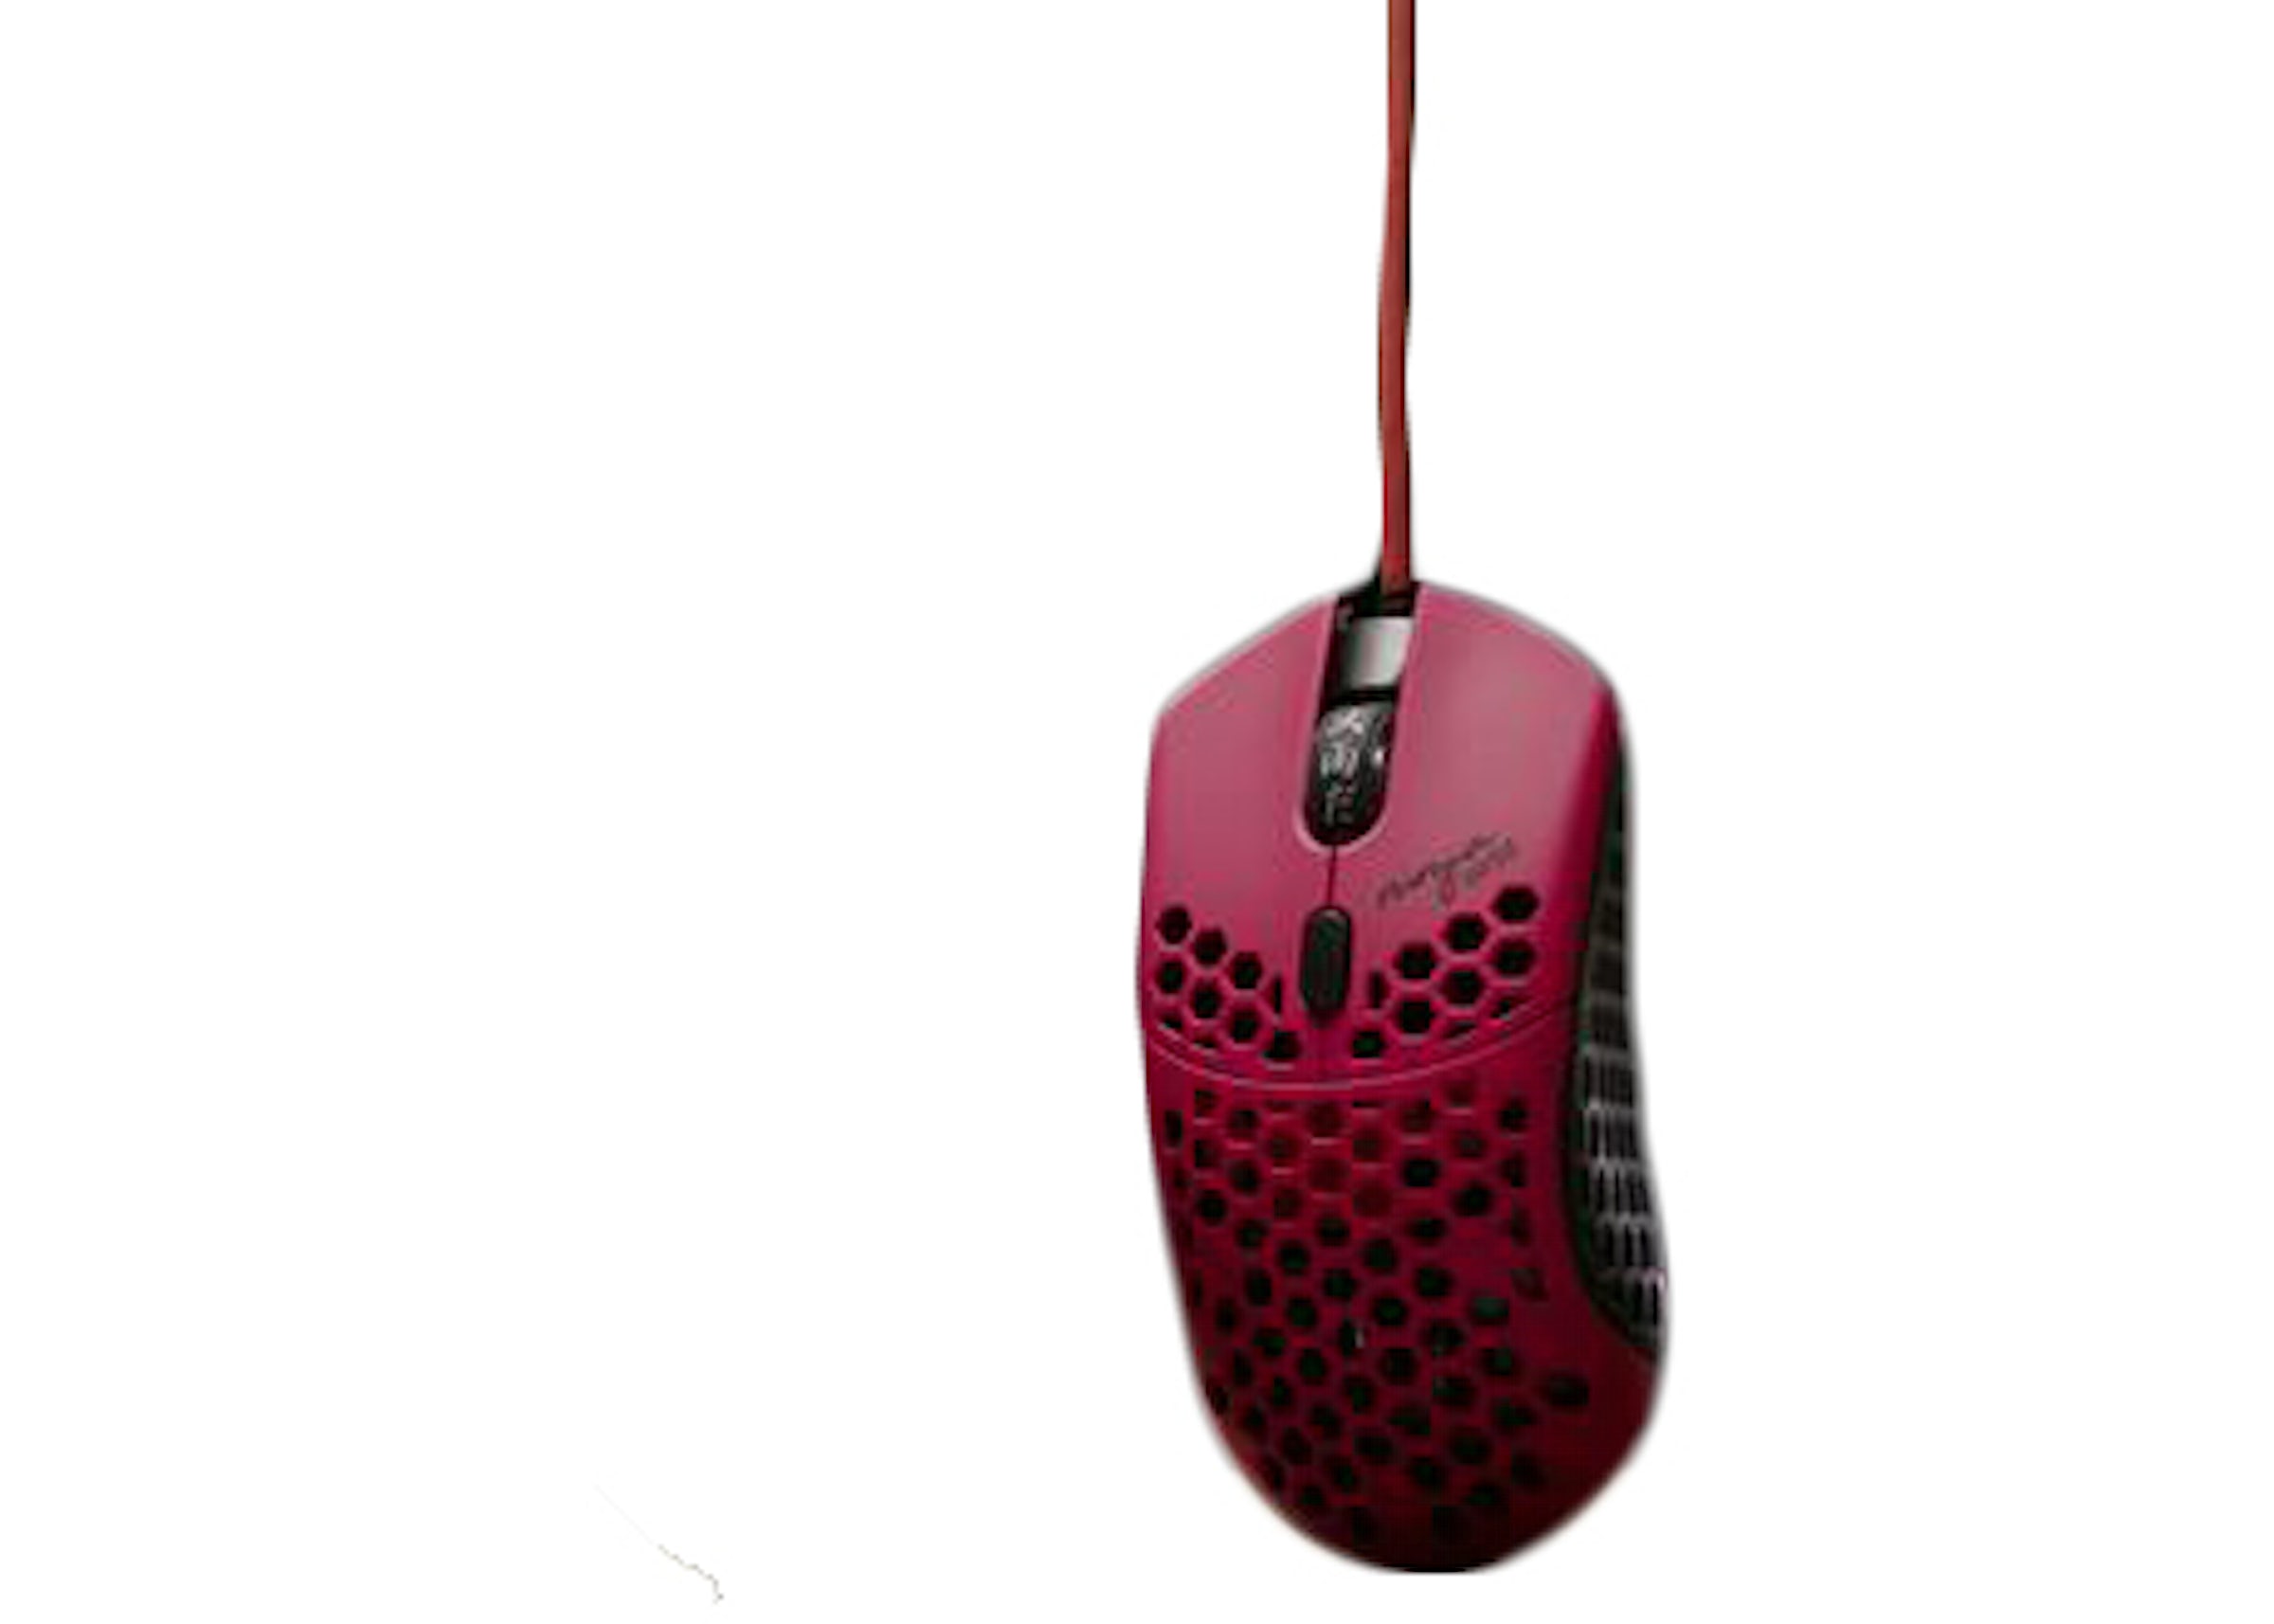 What Kind Of Gaming Mouse Does Ninja Have?